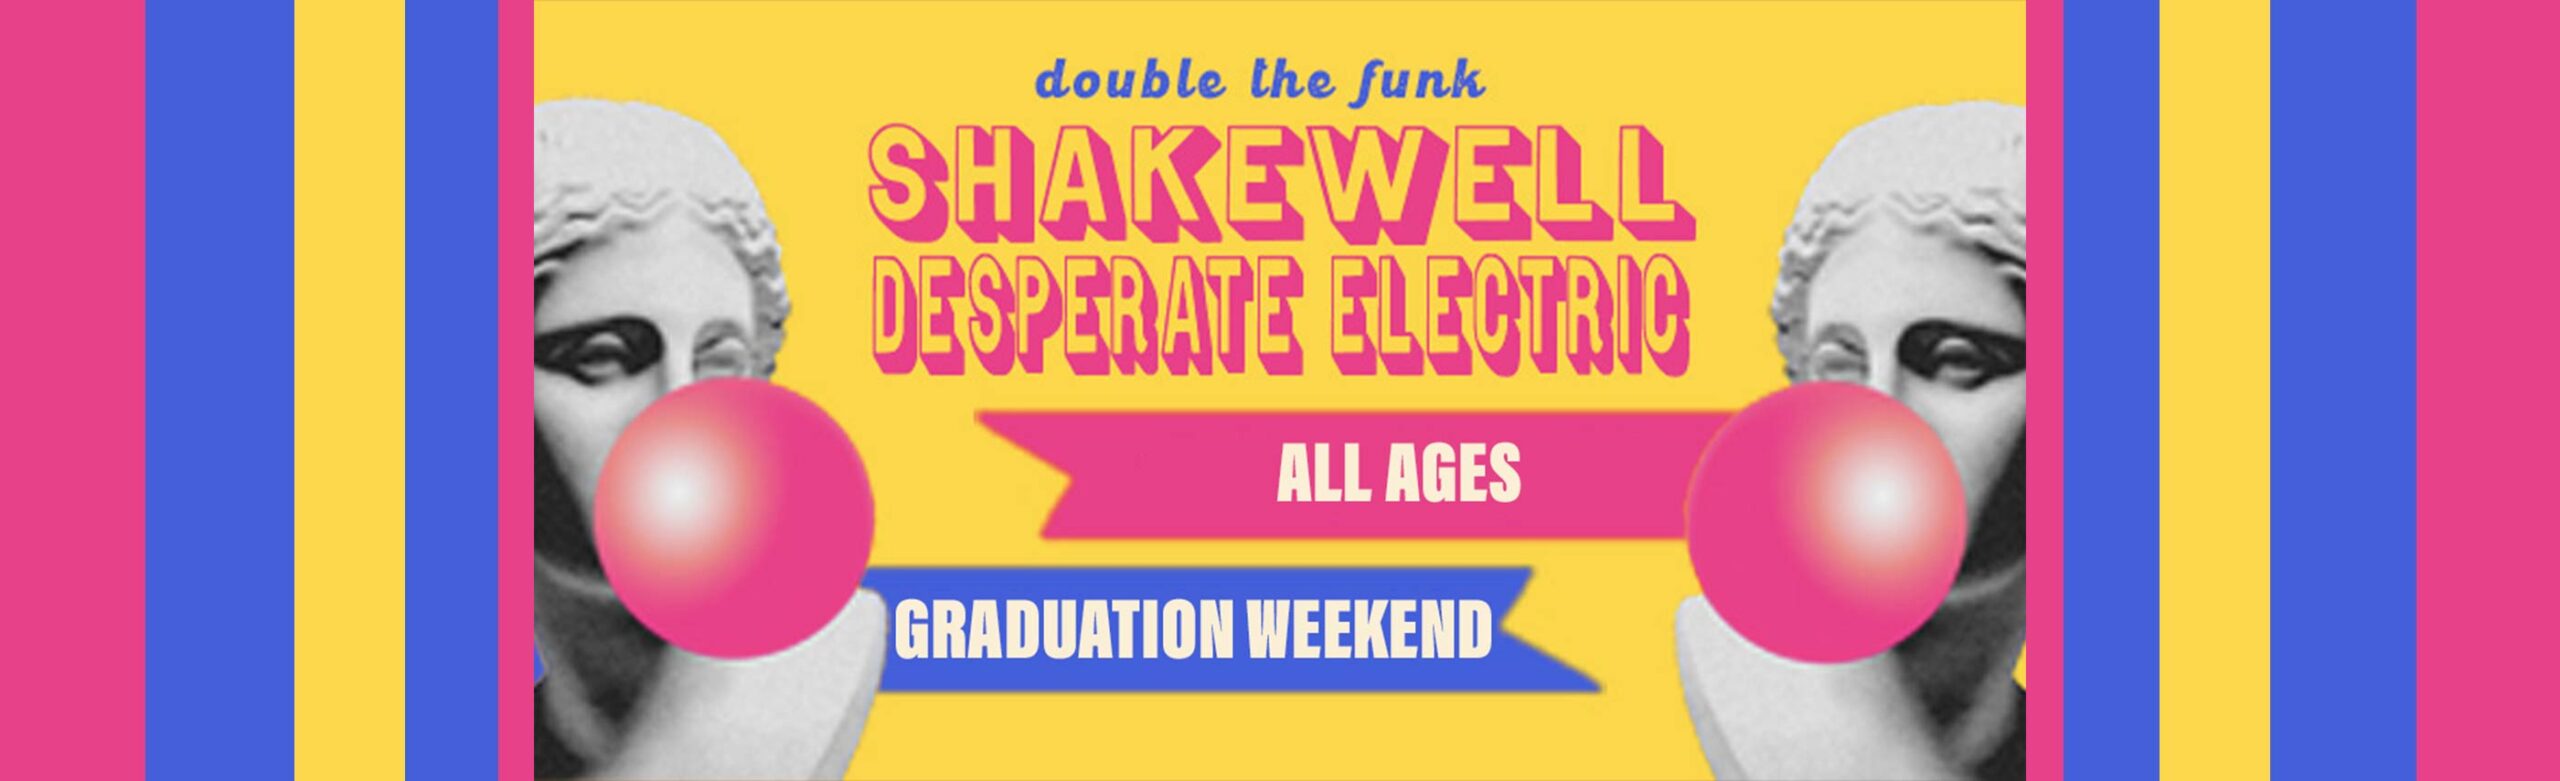 Montana’s Shakewell & Desperate Electric Announce Graduation Weekend Funk Parties at The Wilma & ELM Image